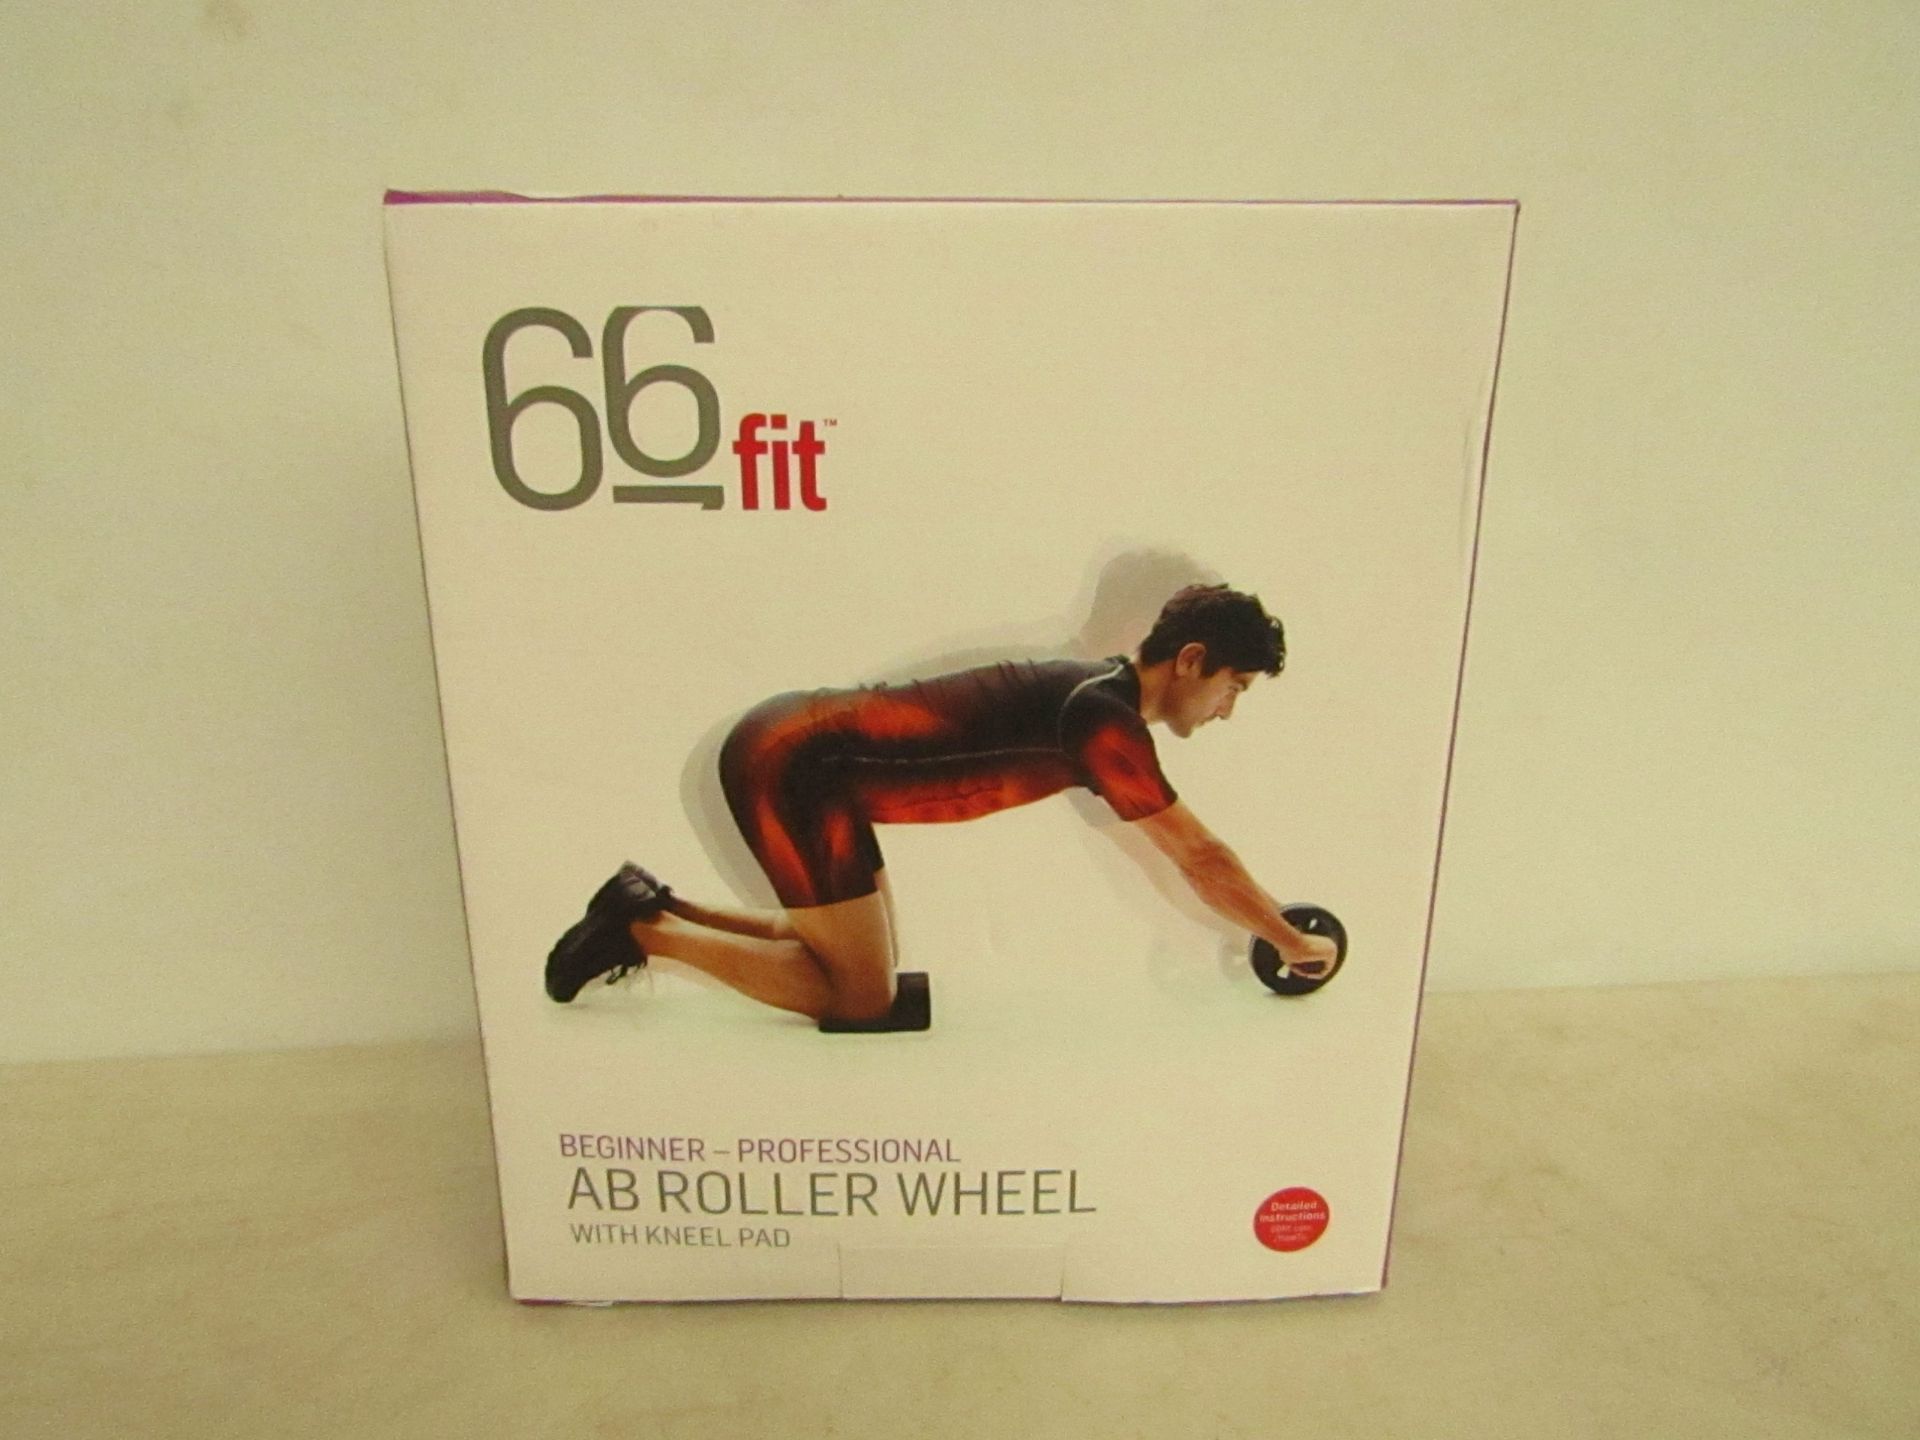 66 Fit ab roller wheel, new and boxed.